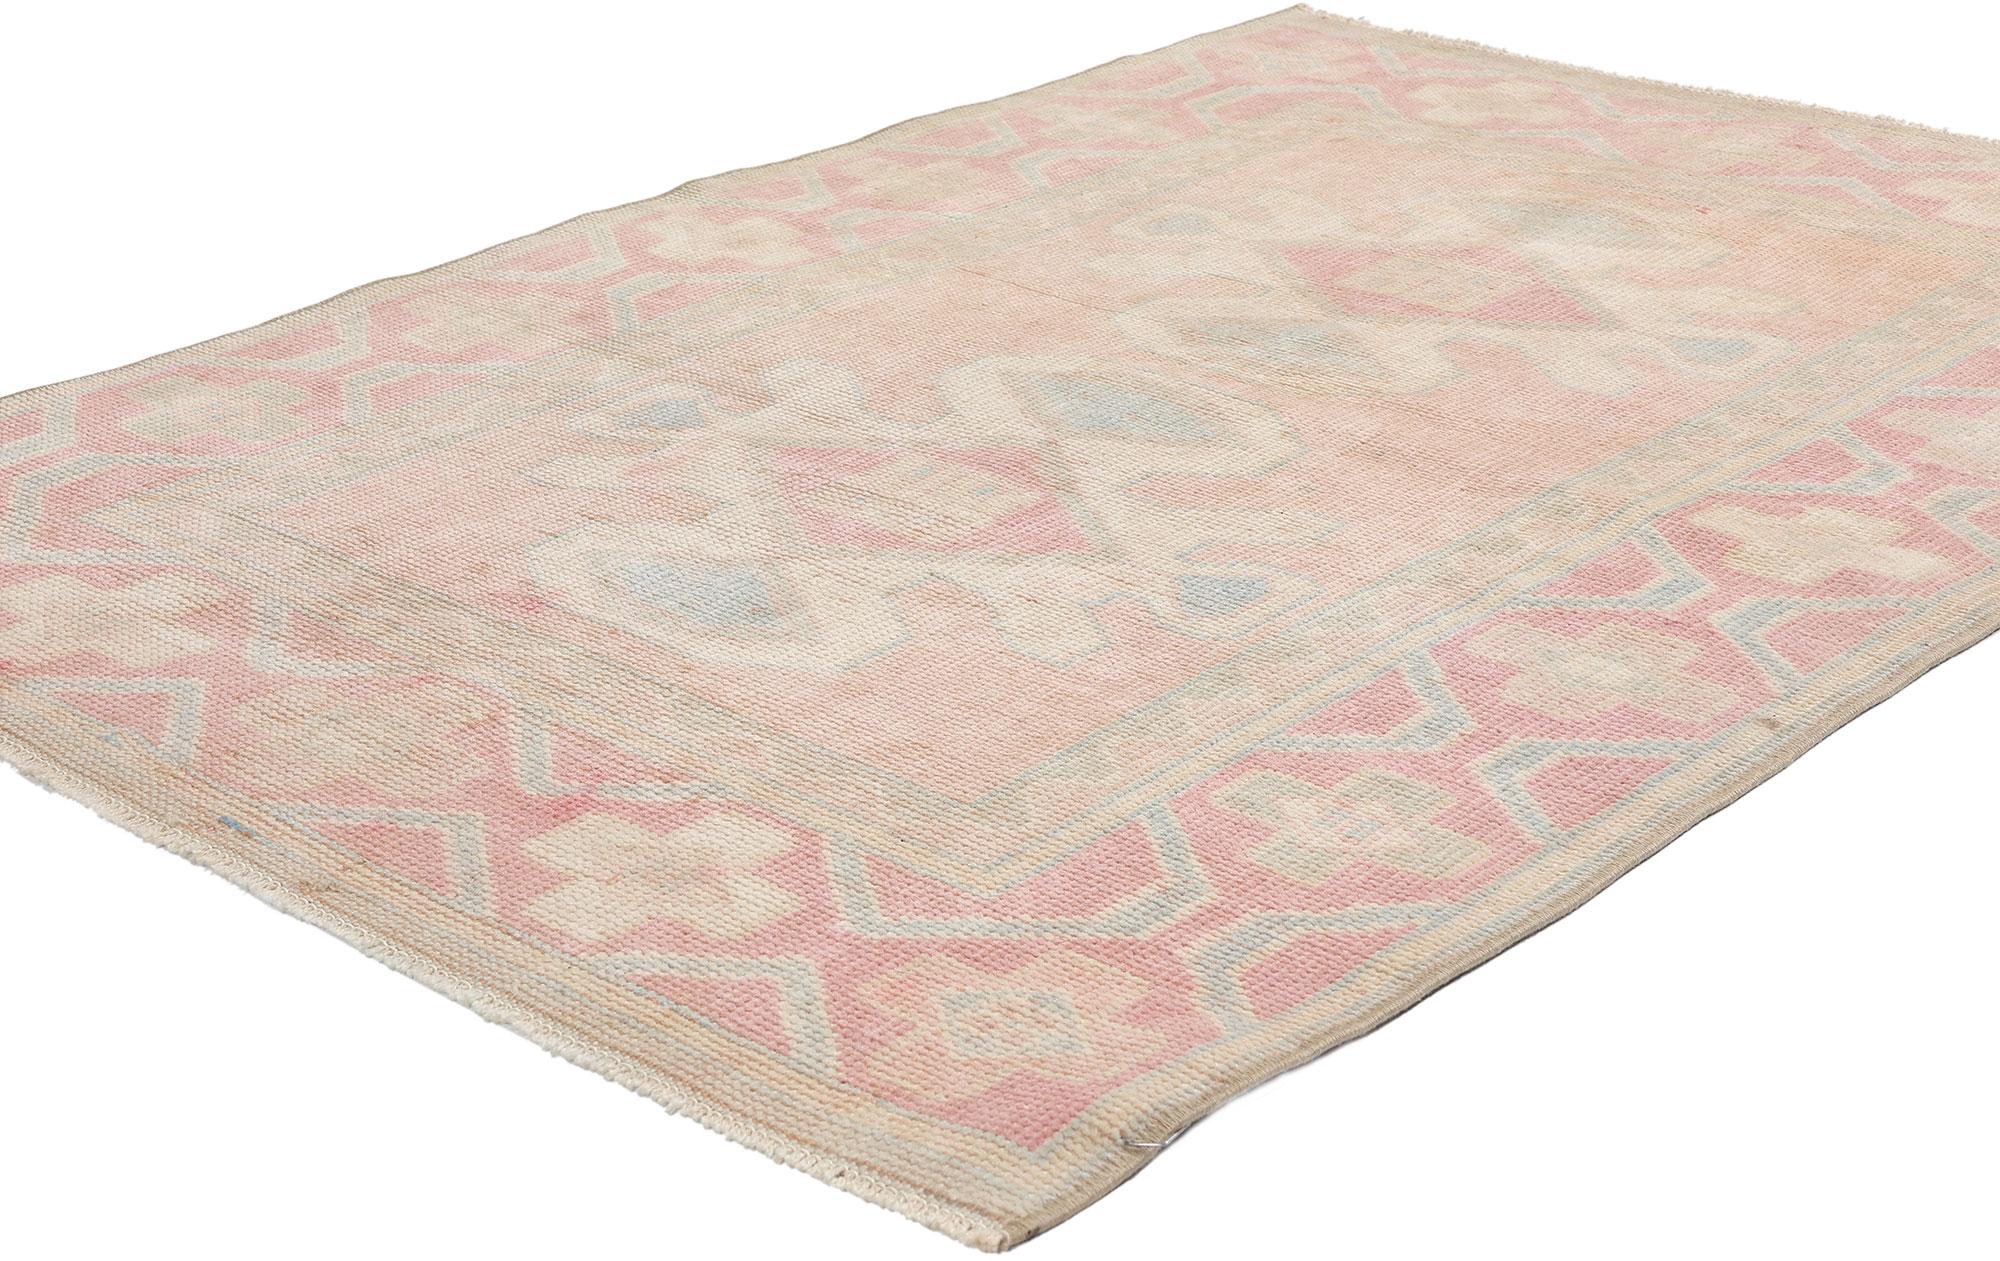 53931 Vintage Pink Turkish Oushak Rug, 02'11 x 04'04. Emerging from the Western expanse of Oushak in Turkey, Turkish Oushak rugs have earned widespread acclaim for their intricate designs, subtle color palettes, and premium wool materials. Renowned